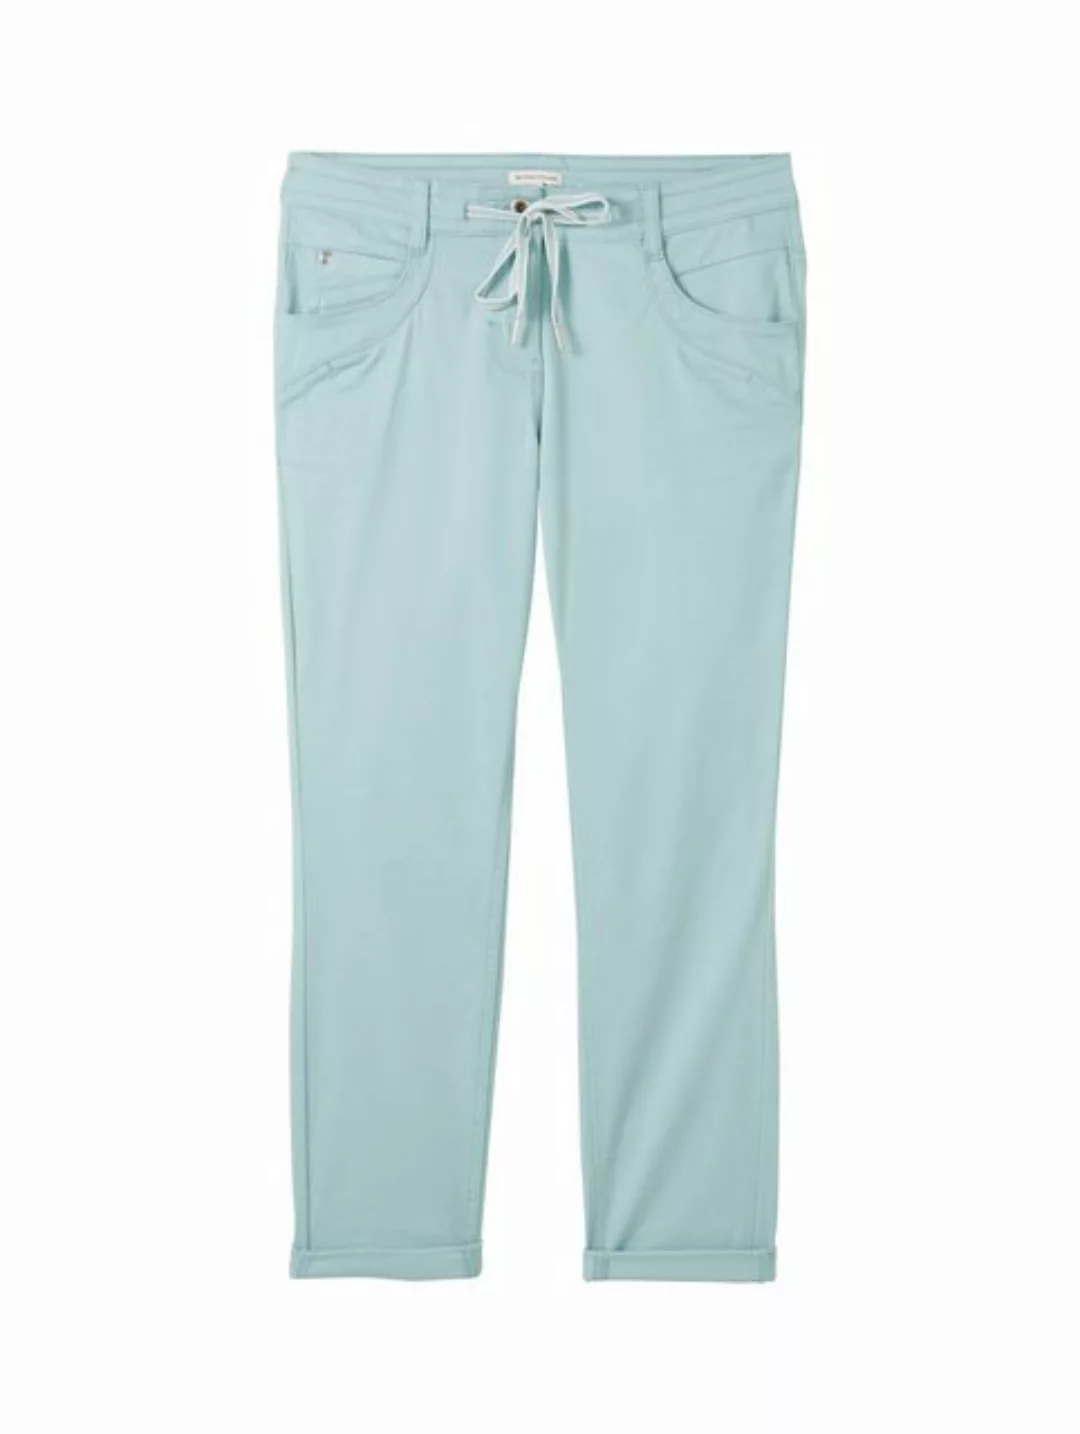 TOM TAILOR Stoffhose Tom Tailor Tapered relaxed, dusty mint blue günstig online kaufen